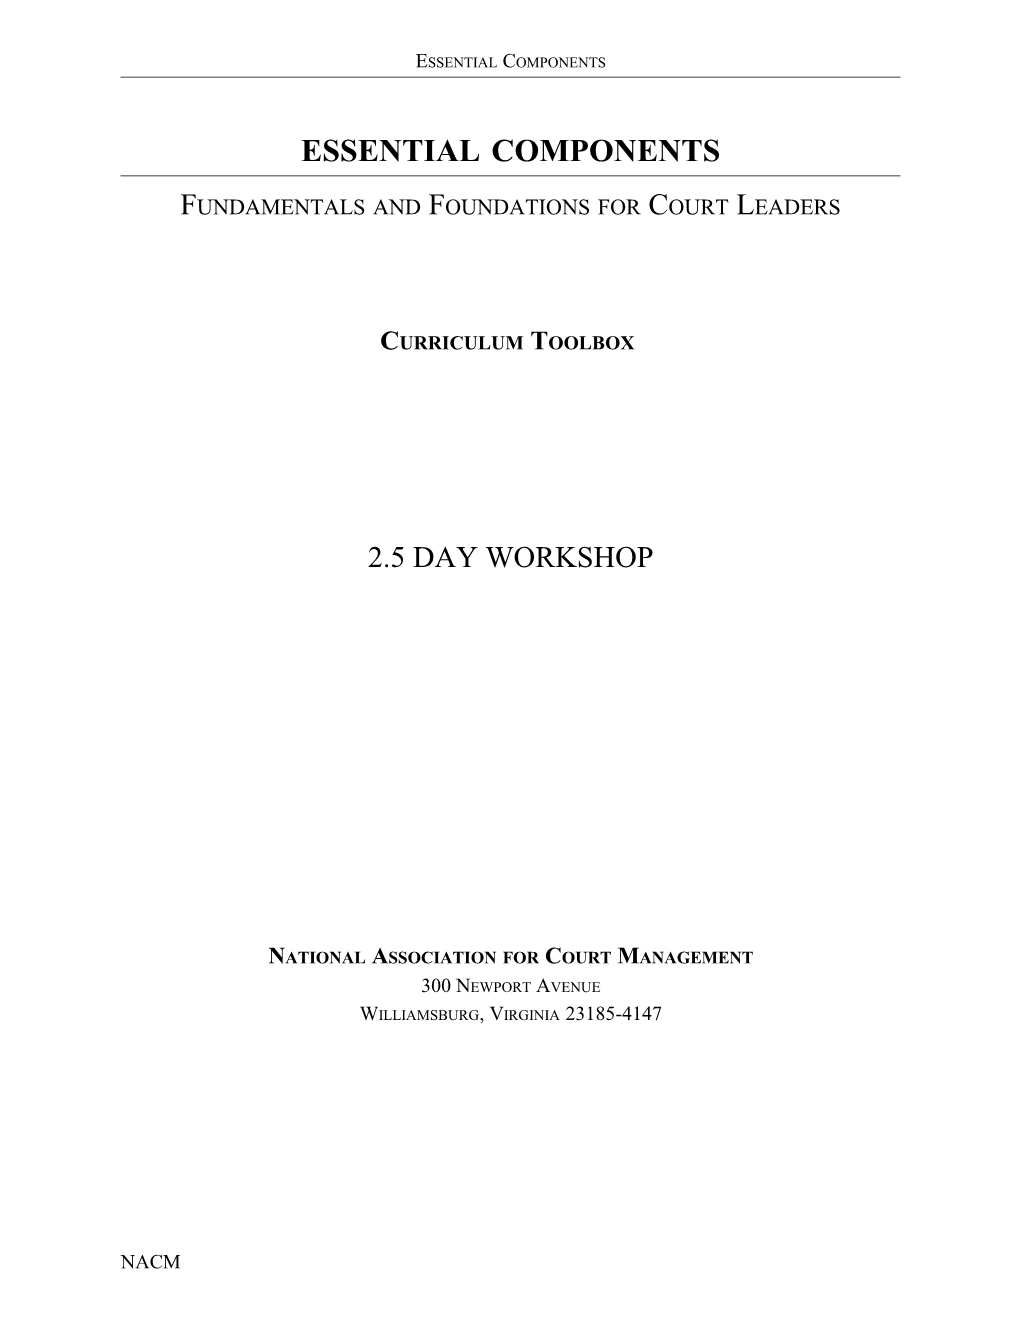 Fundamentals and Foundations for Court Leaders